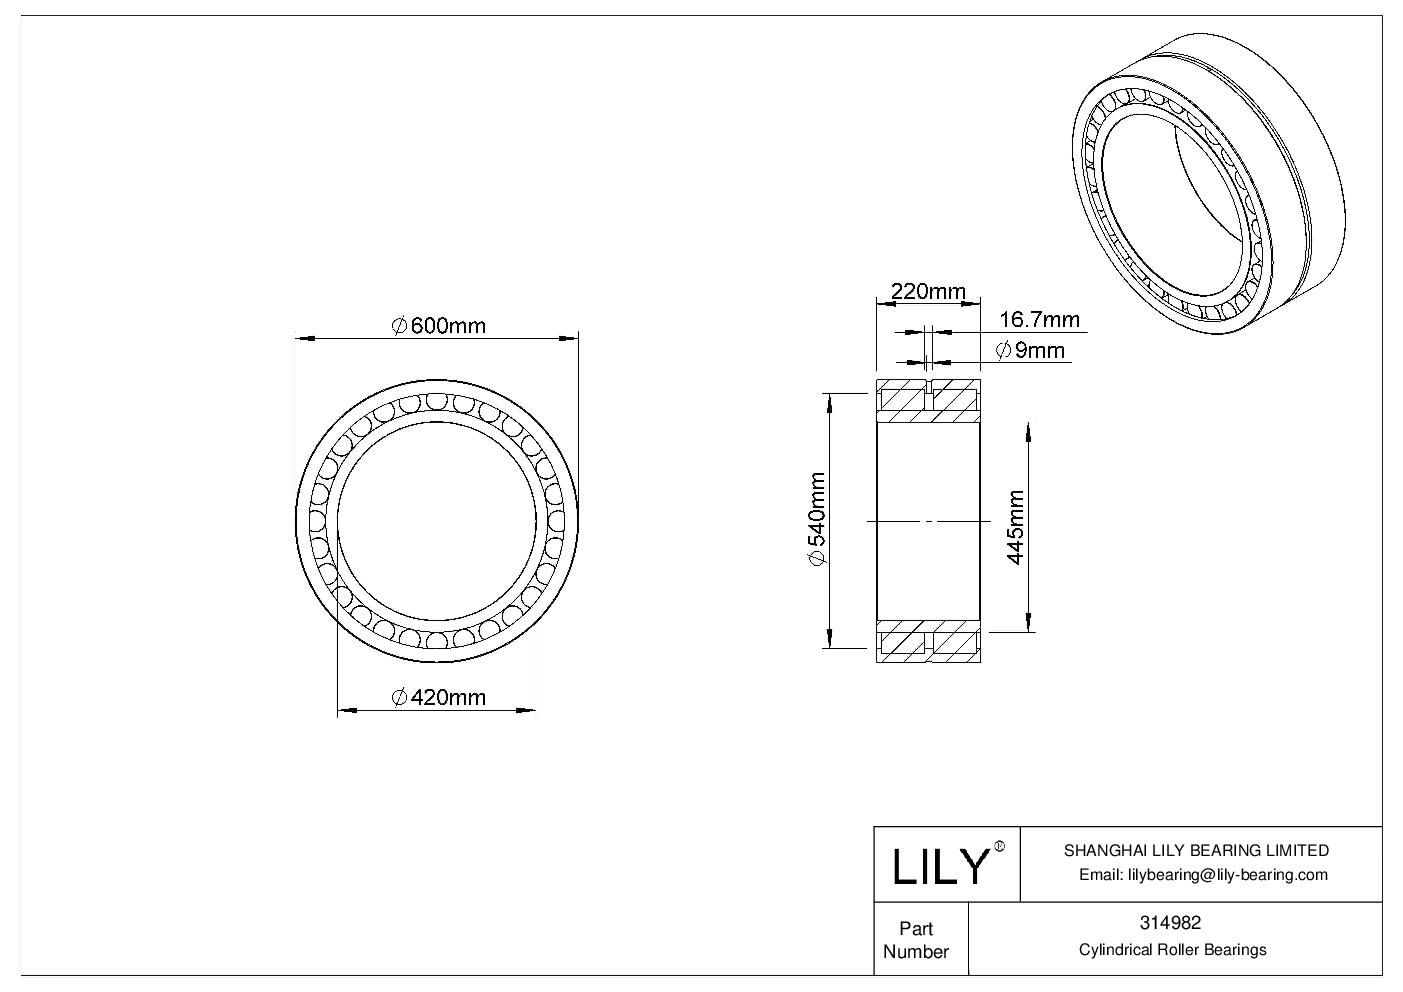 314982 Double Row Cylindrical Roller Bearings cad drawing